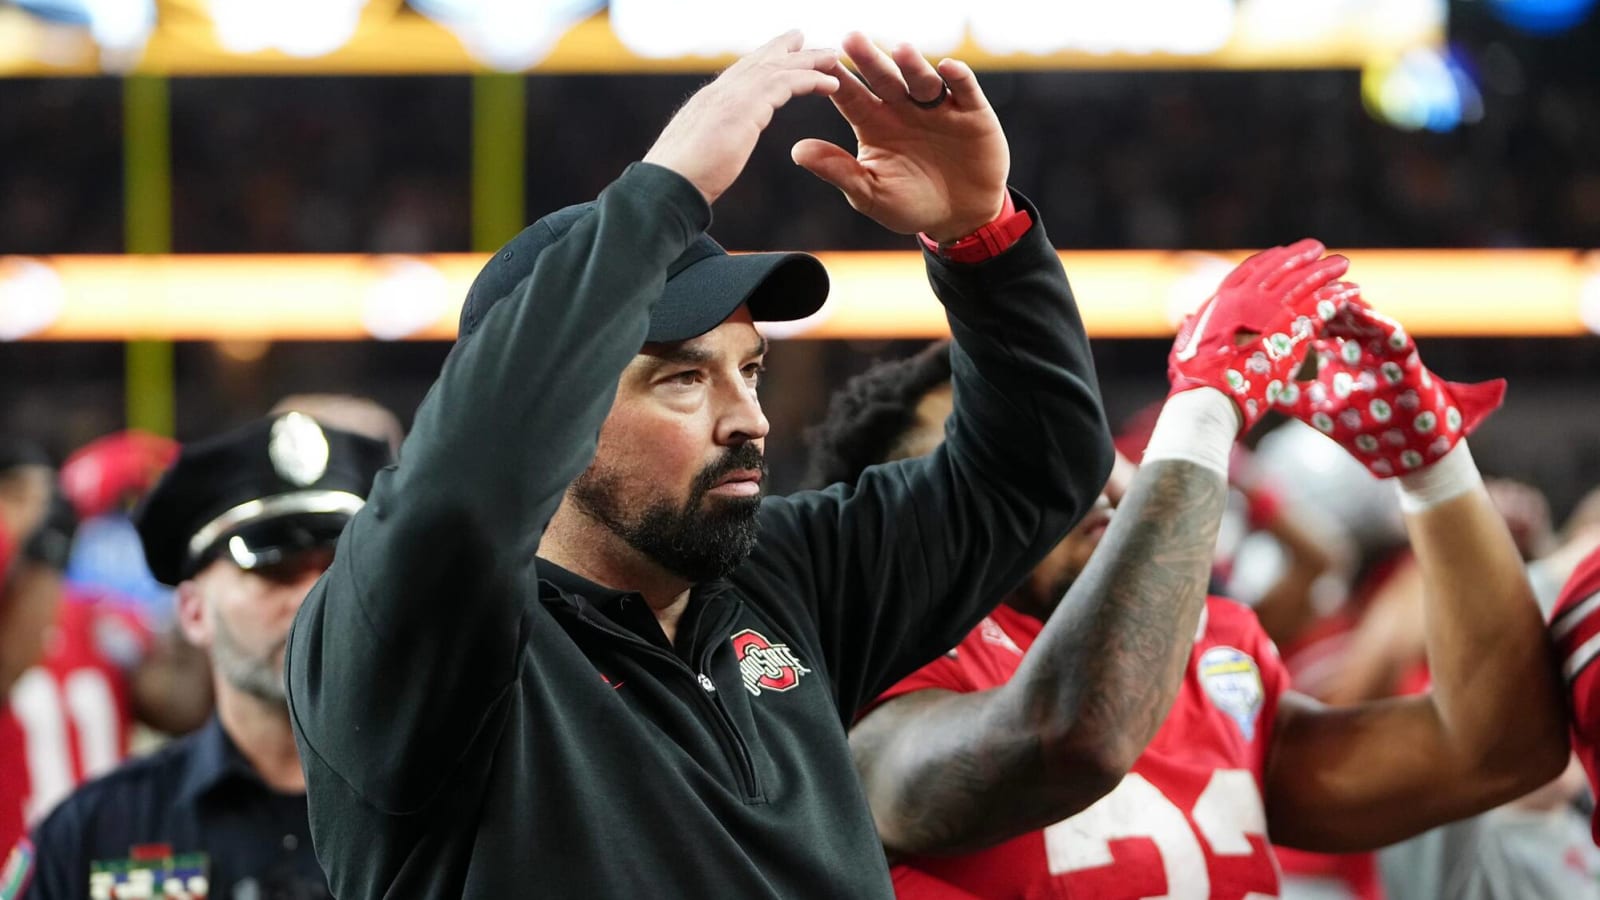 Report: Ohio State Buckeyes Spent $13 Million and Counting in NIL Money in Attempt to Field Elite Roster